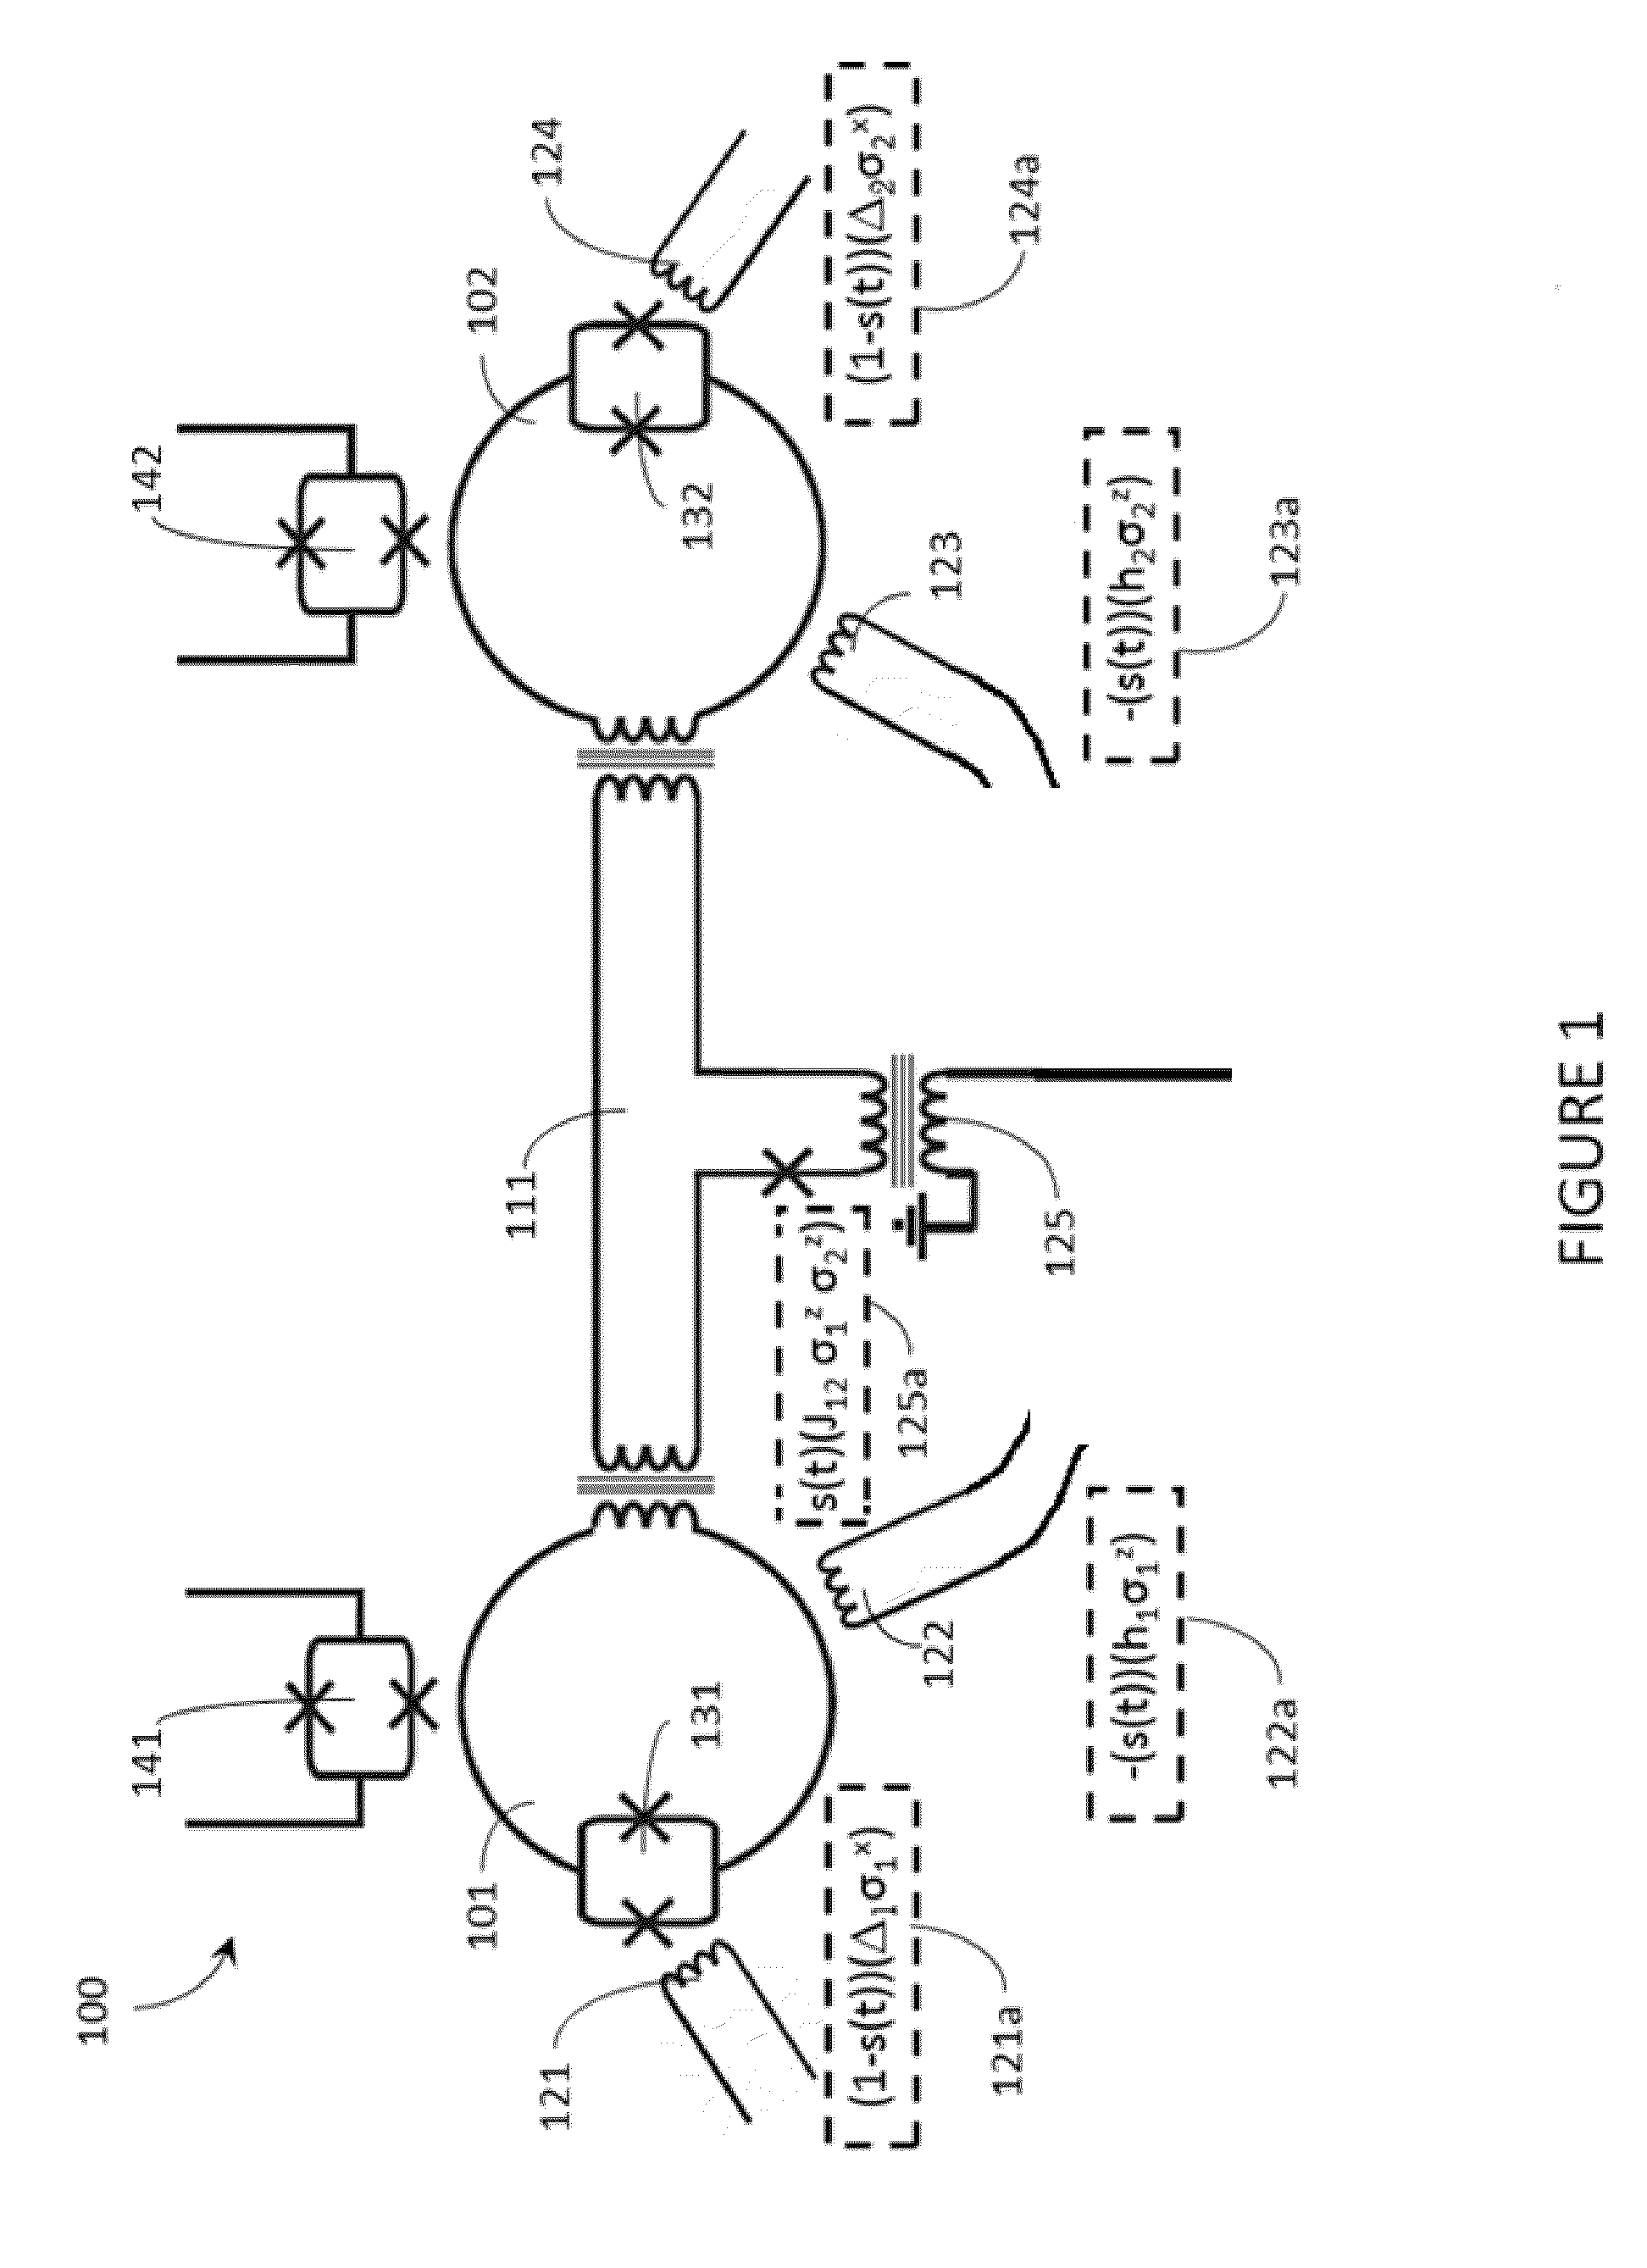 Systems and methods for improving the performance of a quantum processor by reducing errors